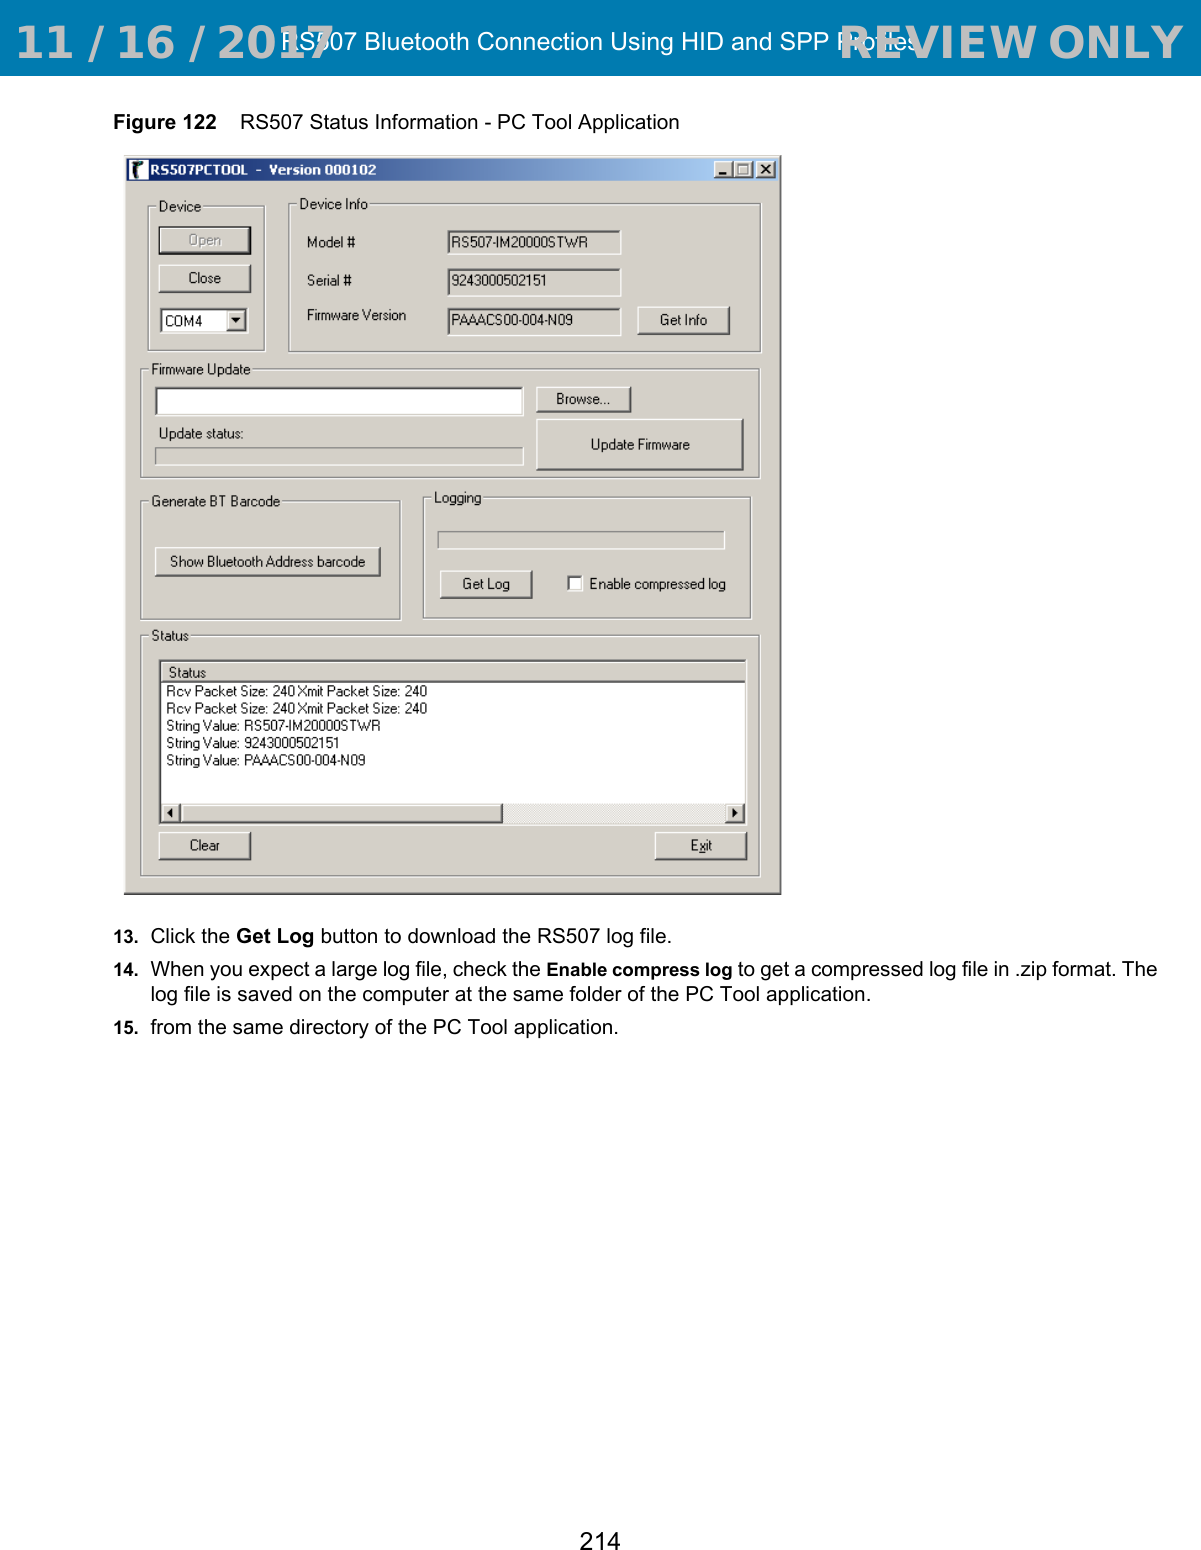 RS507 Bluetooth Connection Using HID and SPP Profiles214Figure 122    RS507 Status Information - PC Tool Application13. Click the Get Log button to download the RS507 log file.14. When you expect a large log file, check the Enable compress log to get a compressed log file in .zip format. The log file is saved on the computer at the same folder of the PC Tool application.15. from the same directory of the PC Tool application. 11 / 16 / 2017                                  REVIEW ONLY                             REVIEW ONLY - REVIEW ONLY - REVIEW ONLY